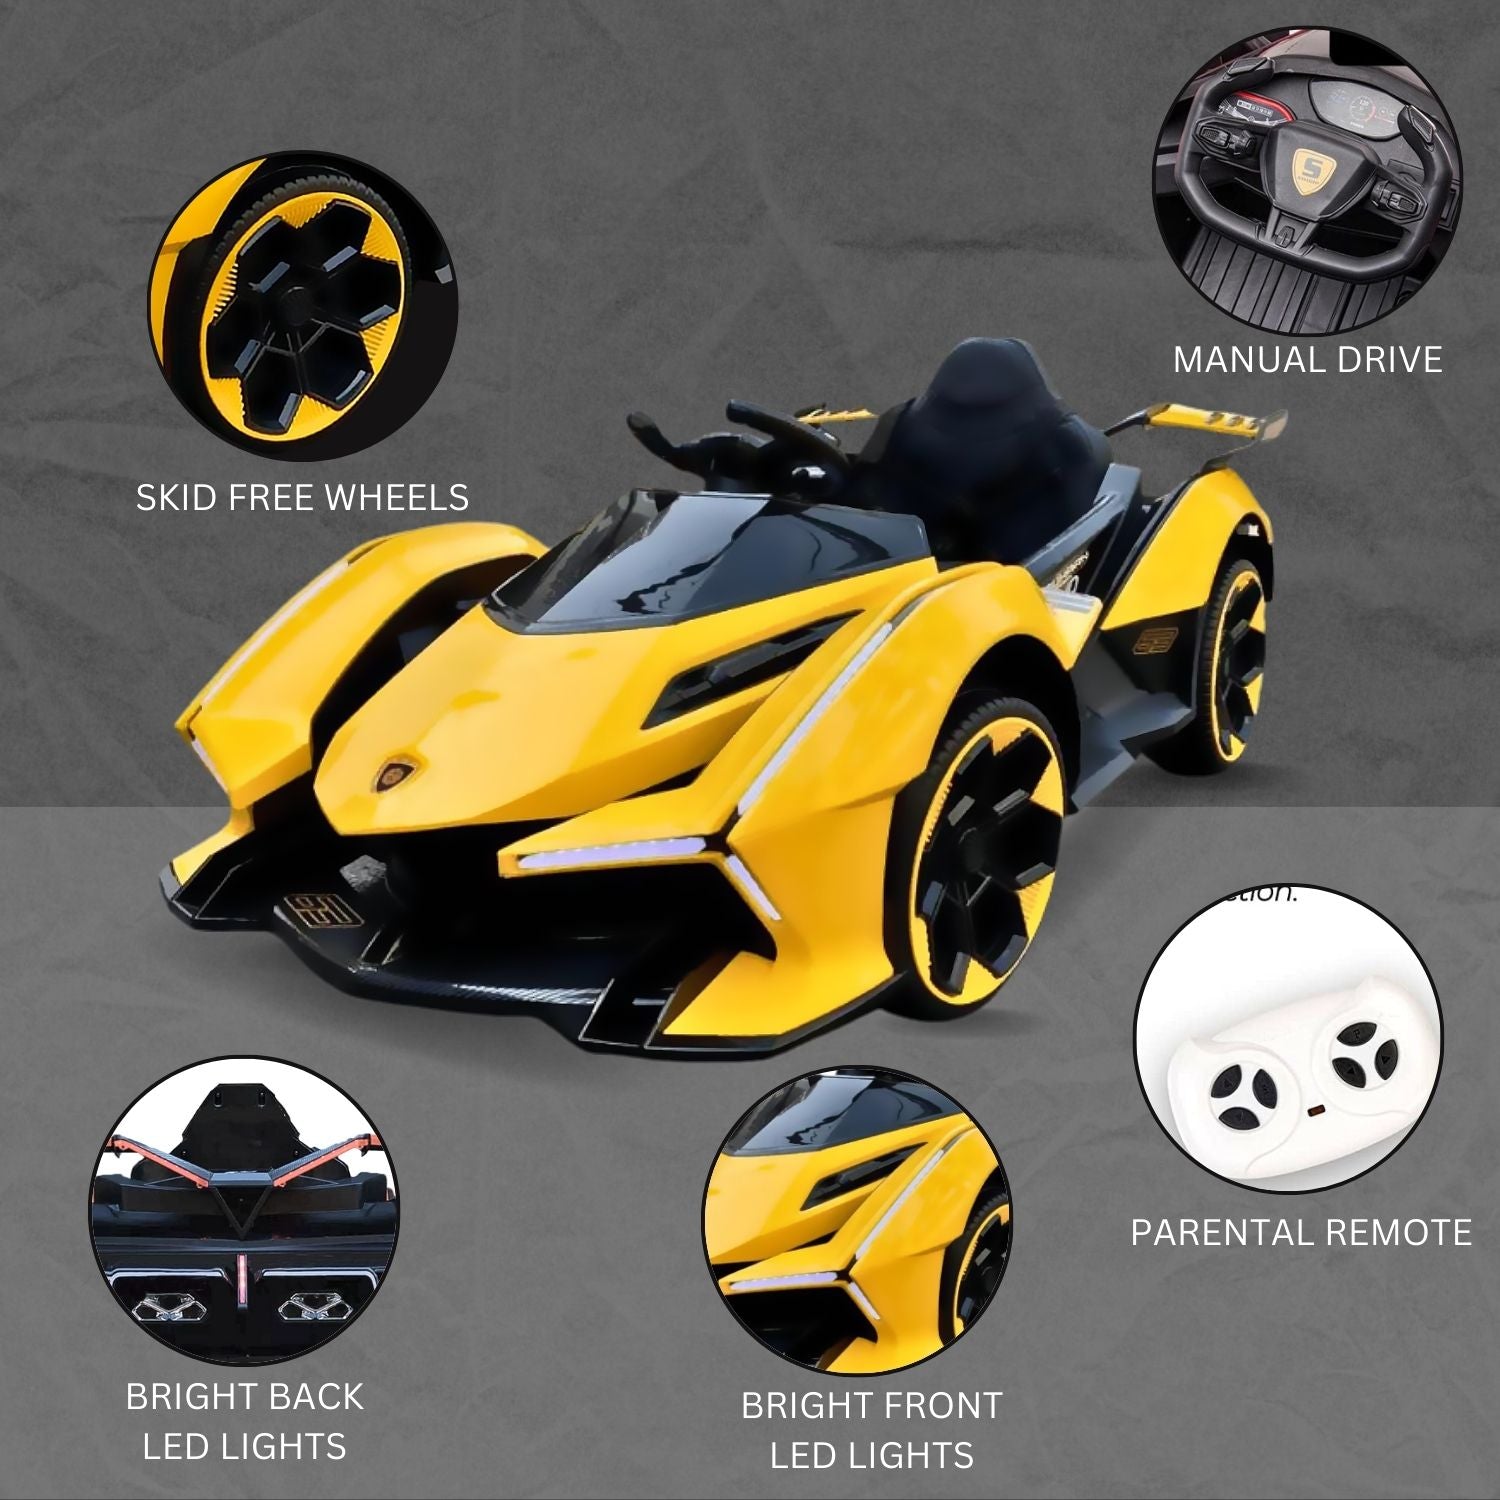 Baby Moo Lambo Ride-On Sports Car | 12V Kids Electric Toy Vehicle | Parental Remote Control | USB MP3 Player | Ages 1-6 - Yellow